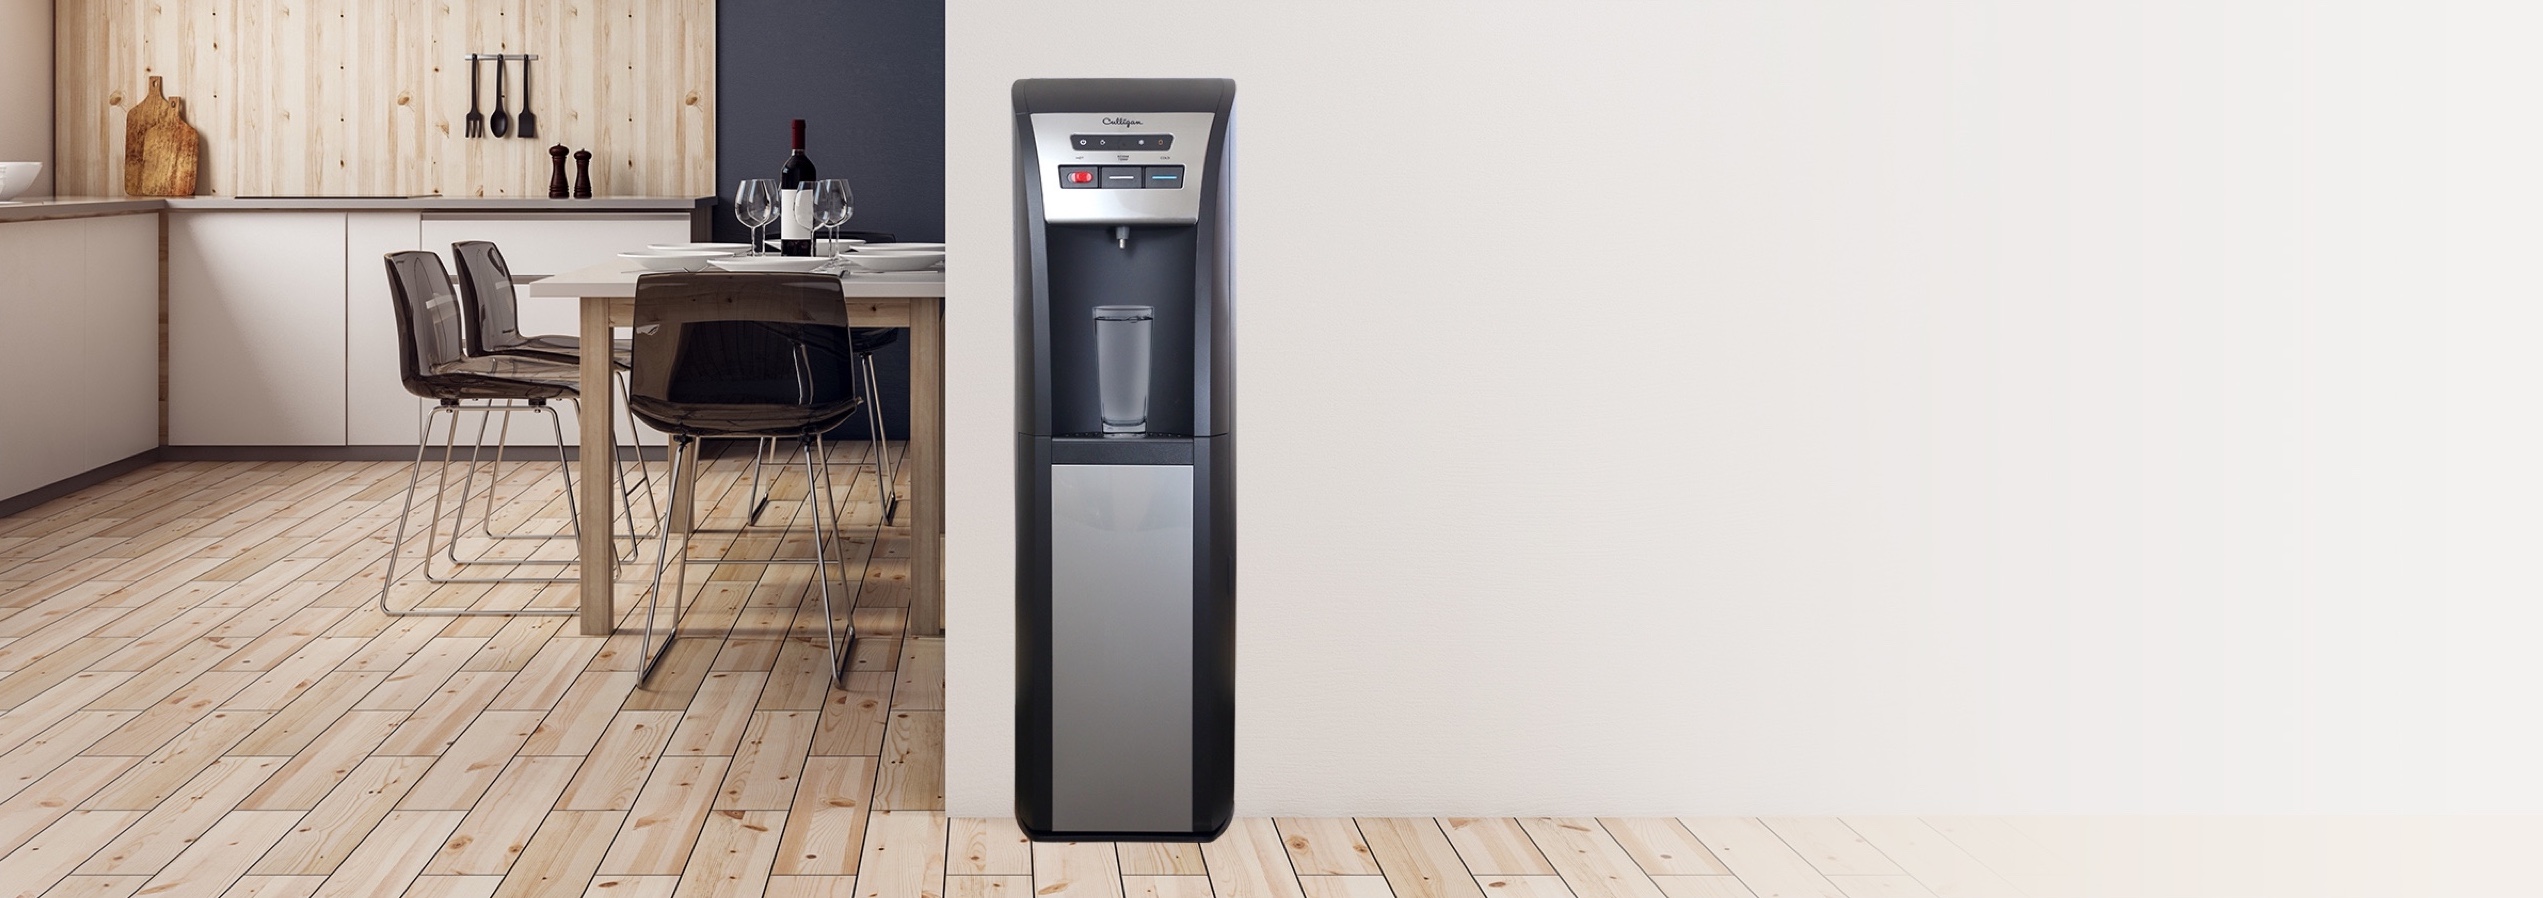 Culligan hot and cold water dispenser in a modern kitchen